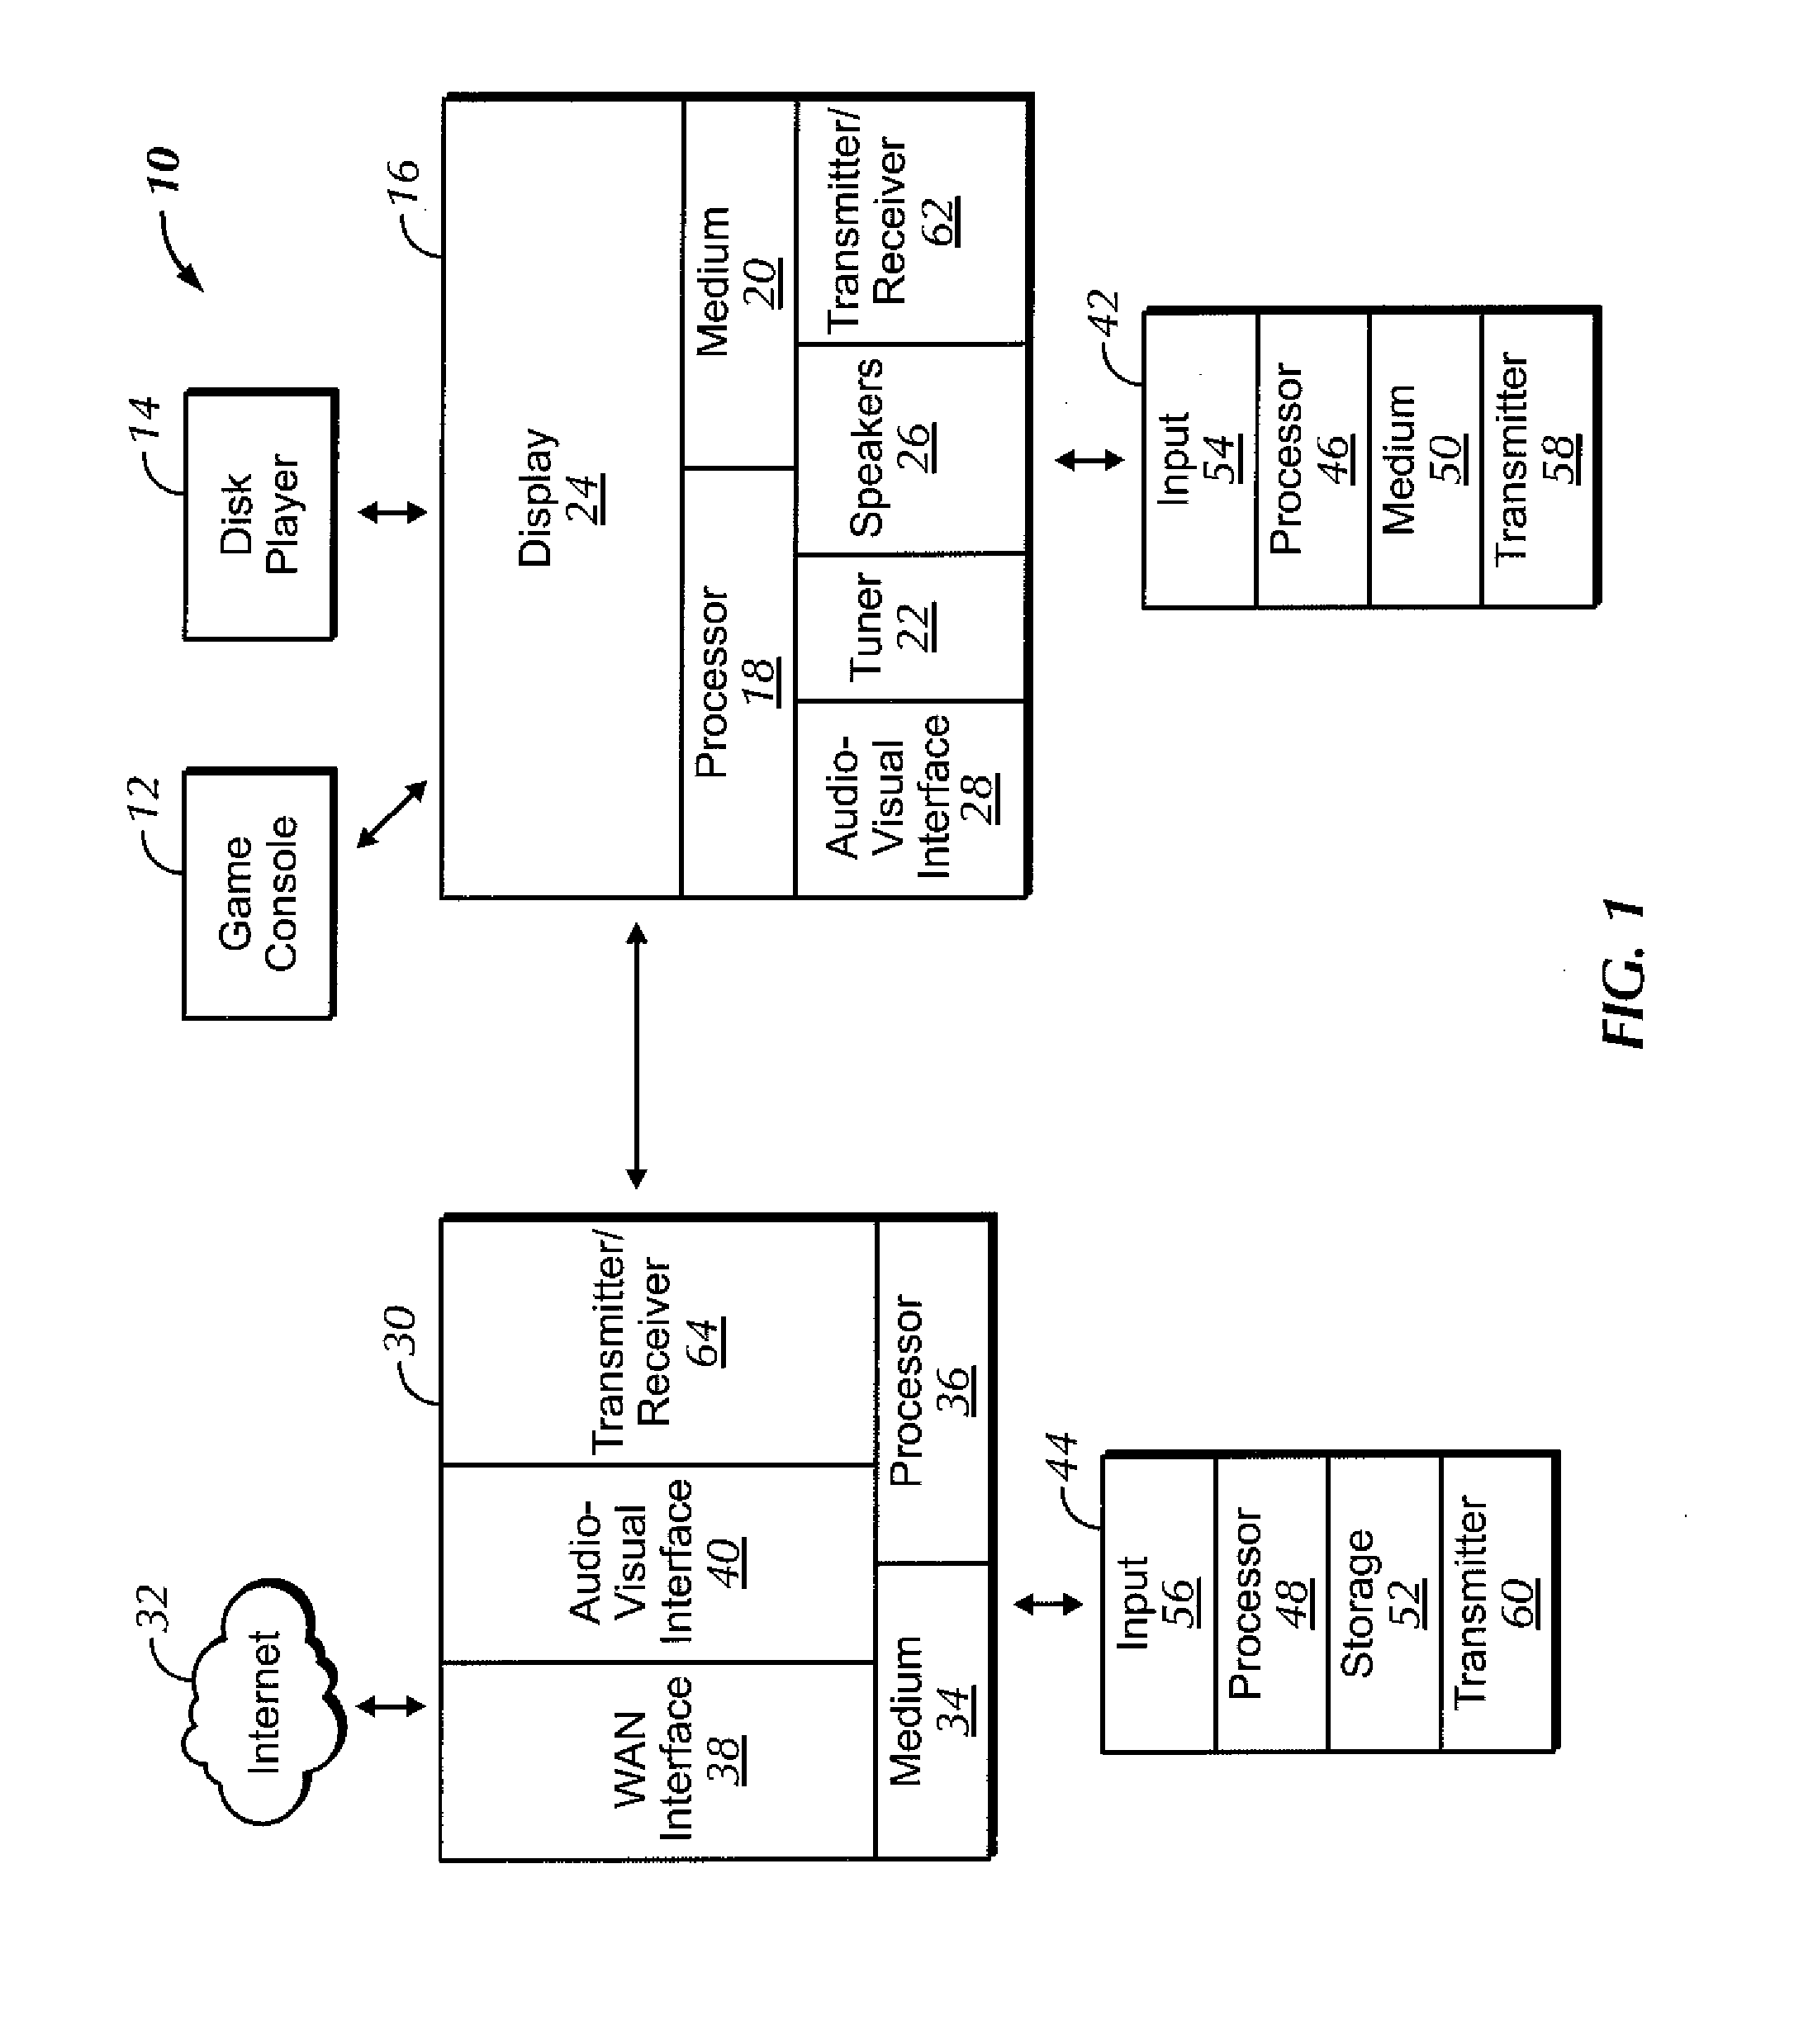 Internet TV module for enabling presentation and navigation of non-native user interface on TV having native user interface using either TV remote control or module remote control